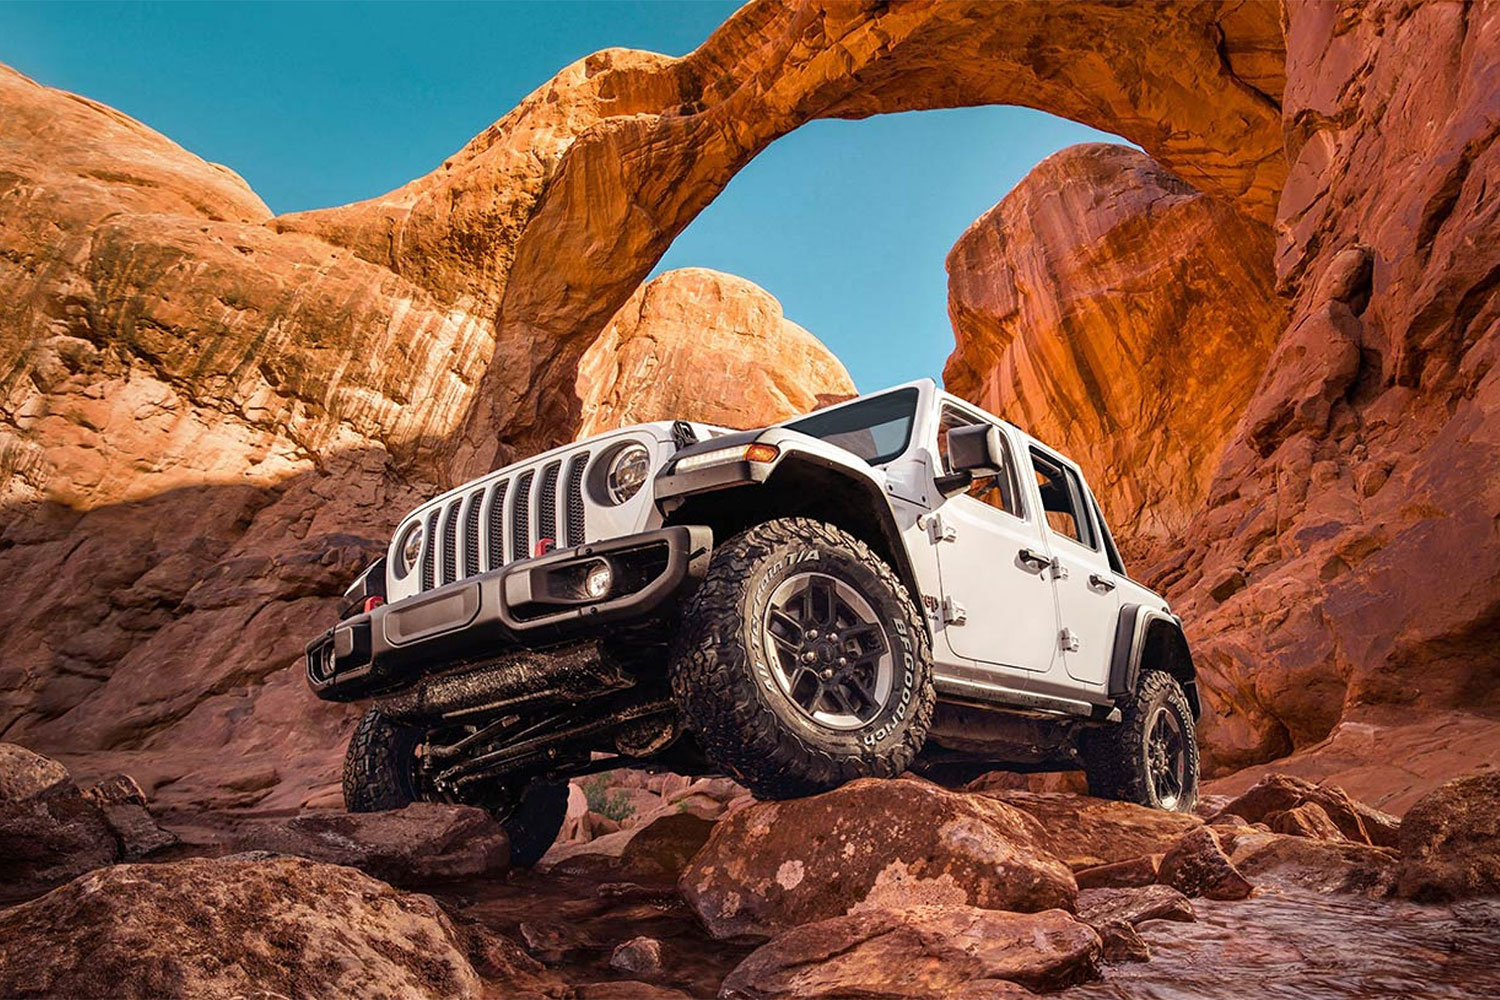 https://www.themanual.com/wp-content/uploads/sites/9/2020/09/jeep-wrangler-rubicon.jpg?fit=800%2C800&p=1